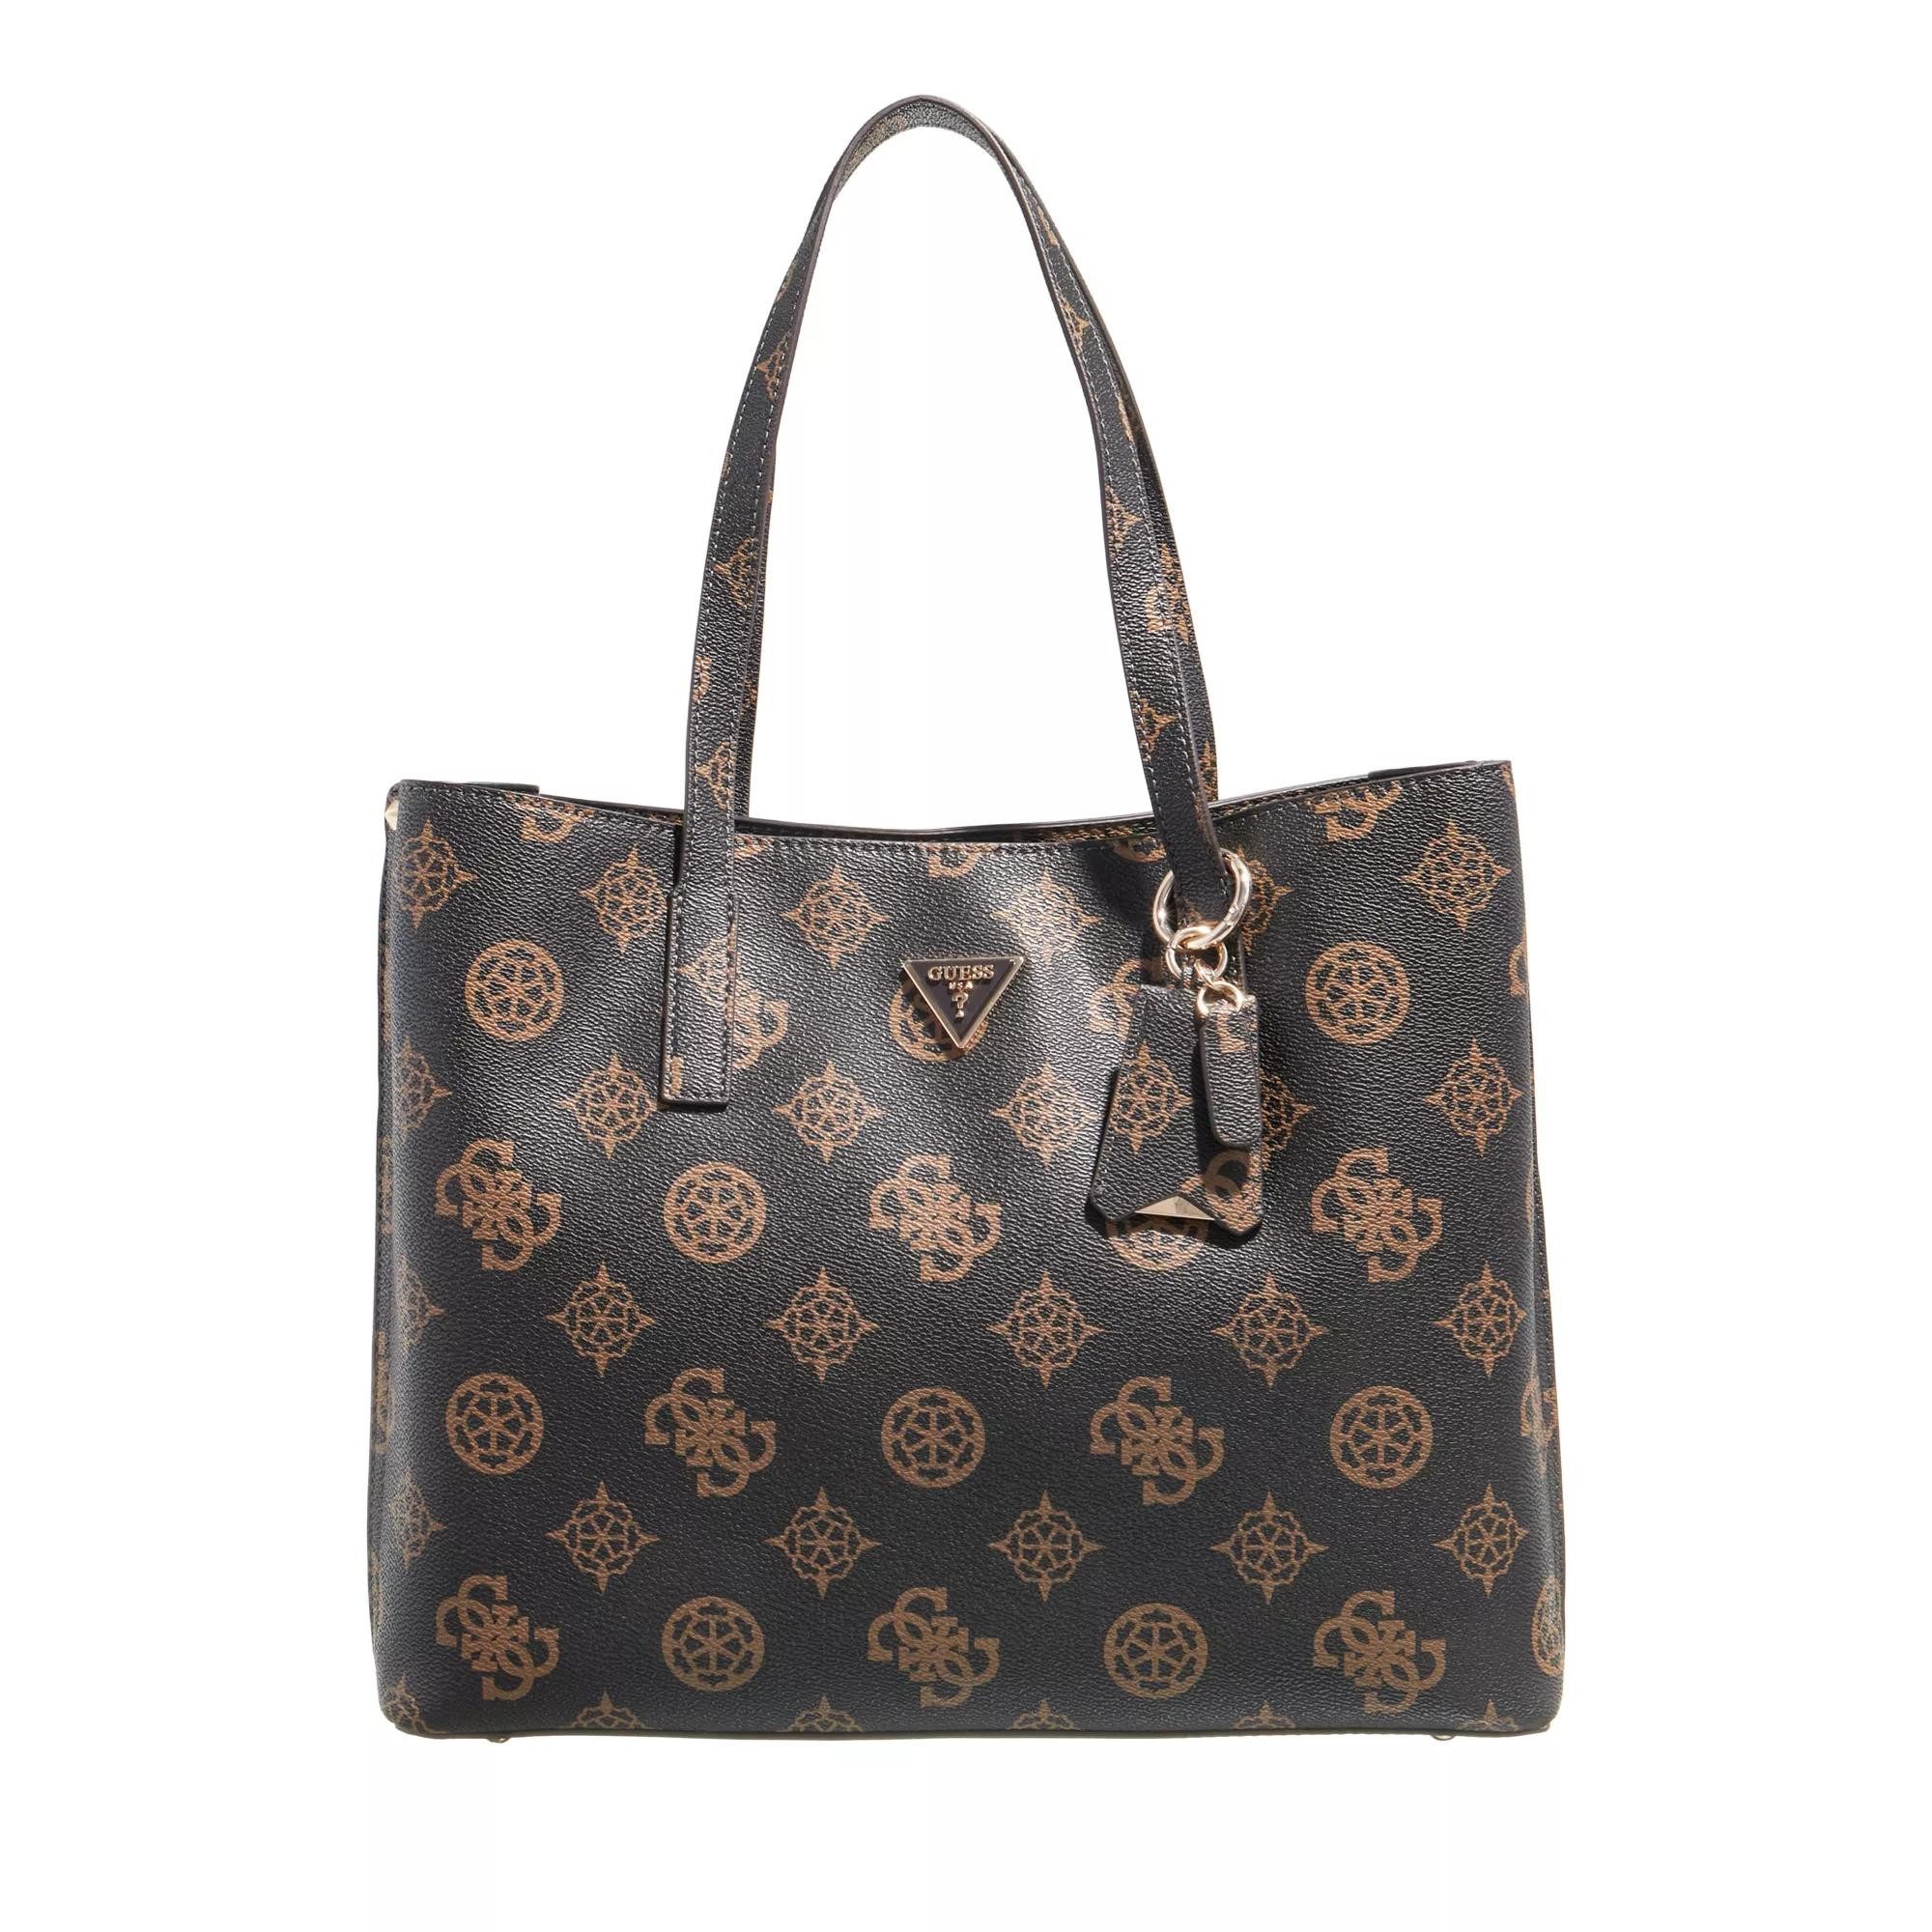 Guess Schultertasche brown (1-tlg)